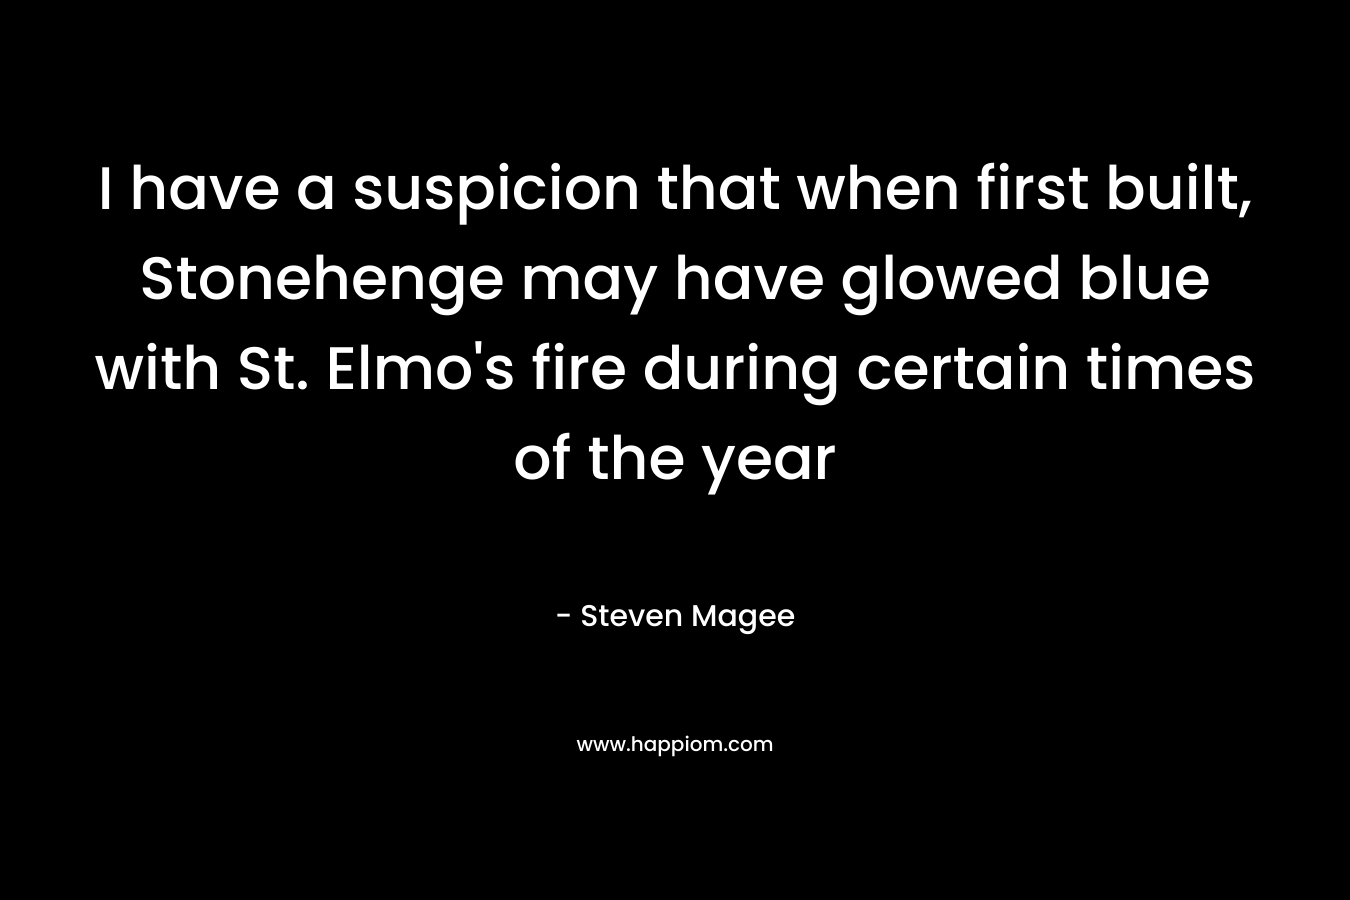 I have a suspicion that when first built, Stonehenge may have glowed blue with St. Elmo’s fire during certain times of the year – Steven Magee